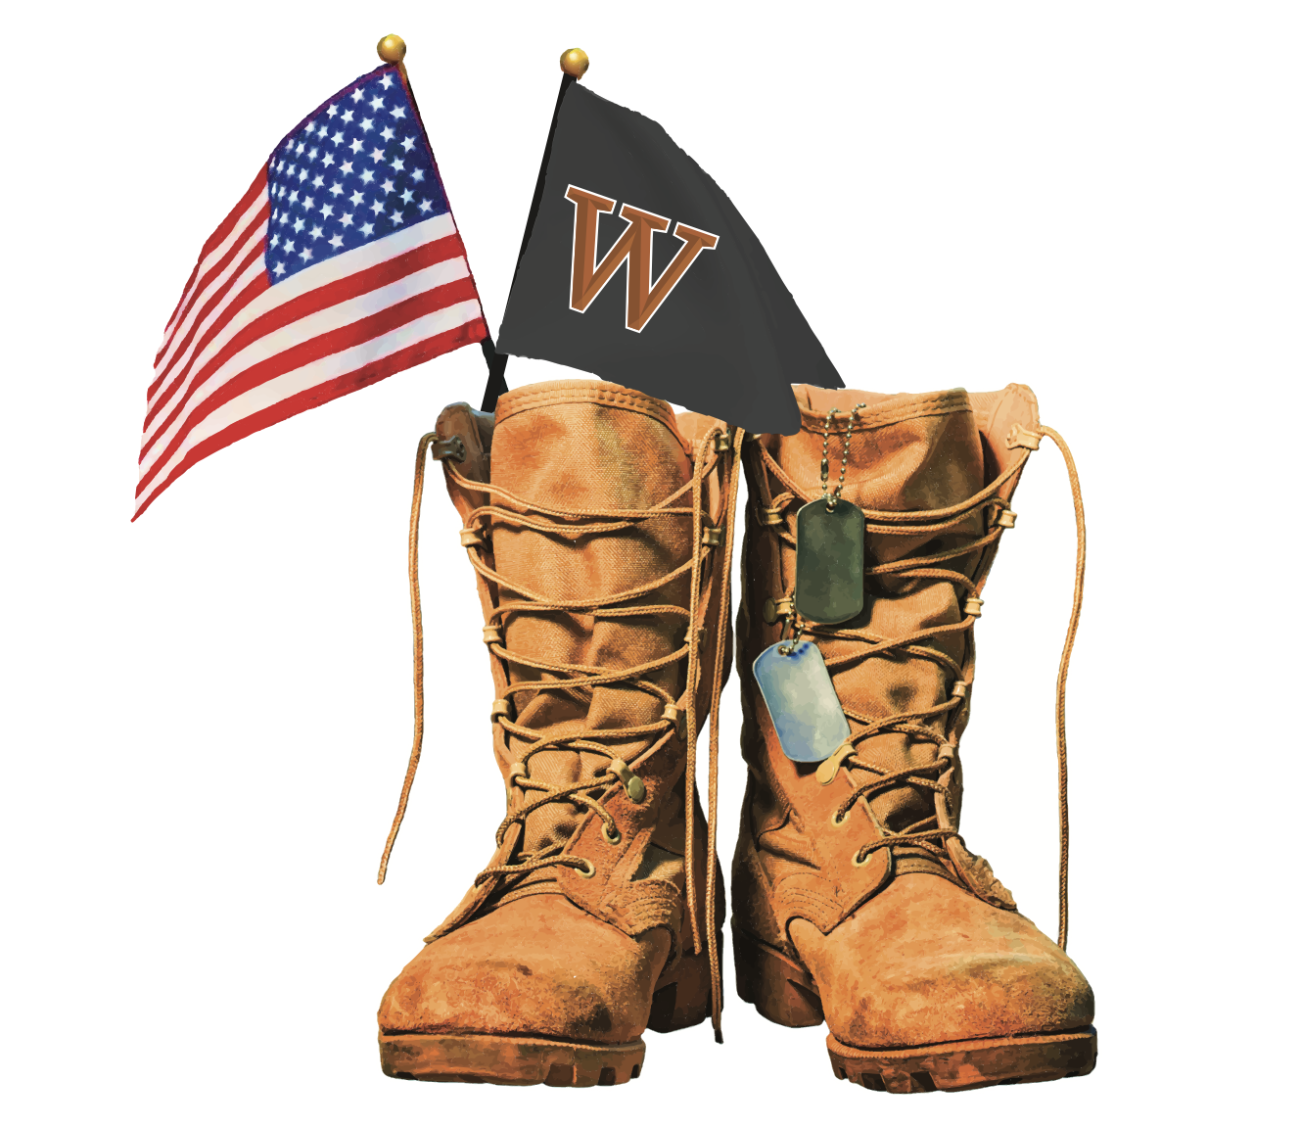 Military Boots With An American Flag and a Waynesburg Monogram Flag